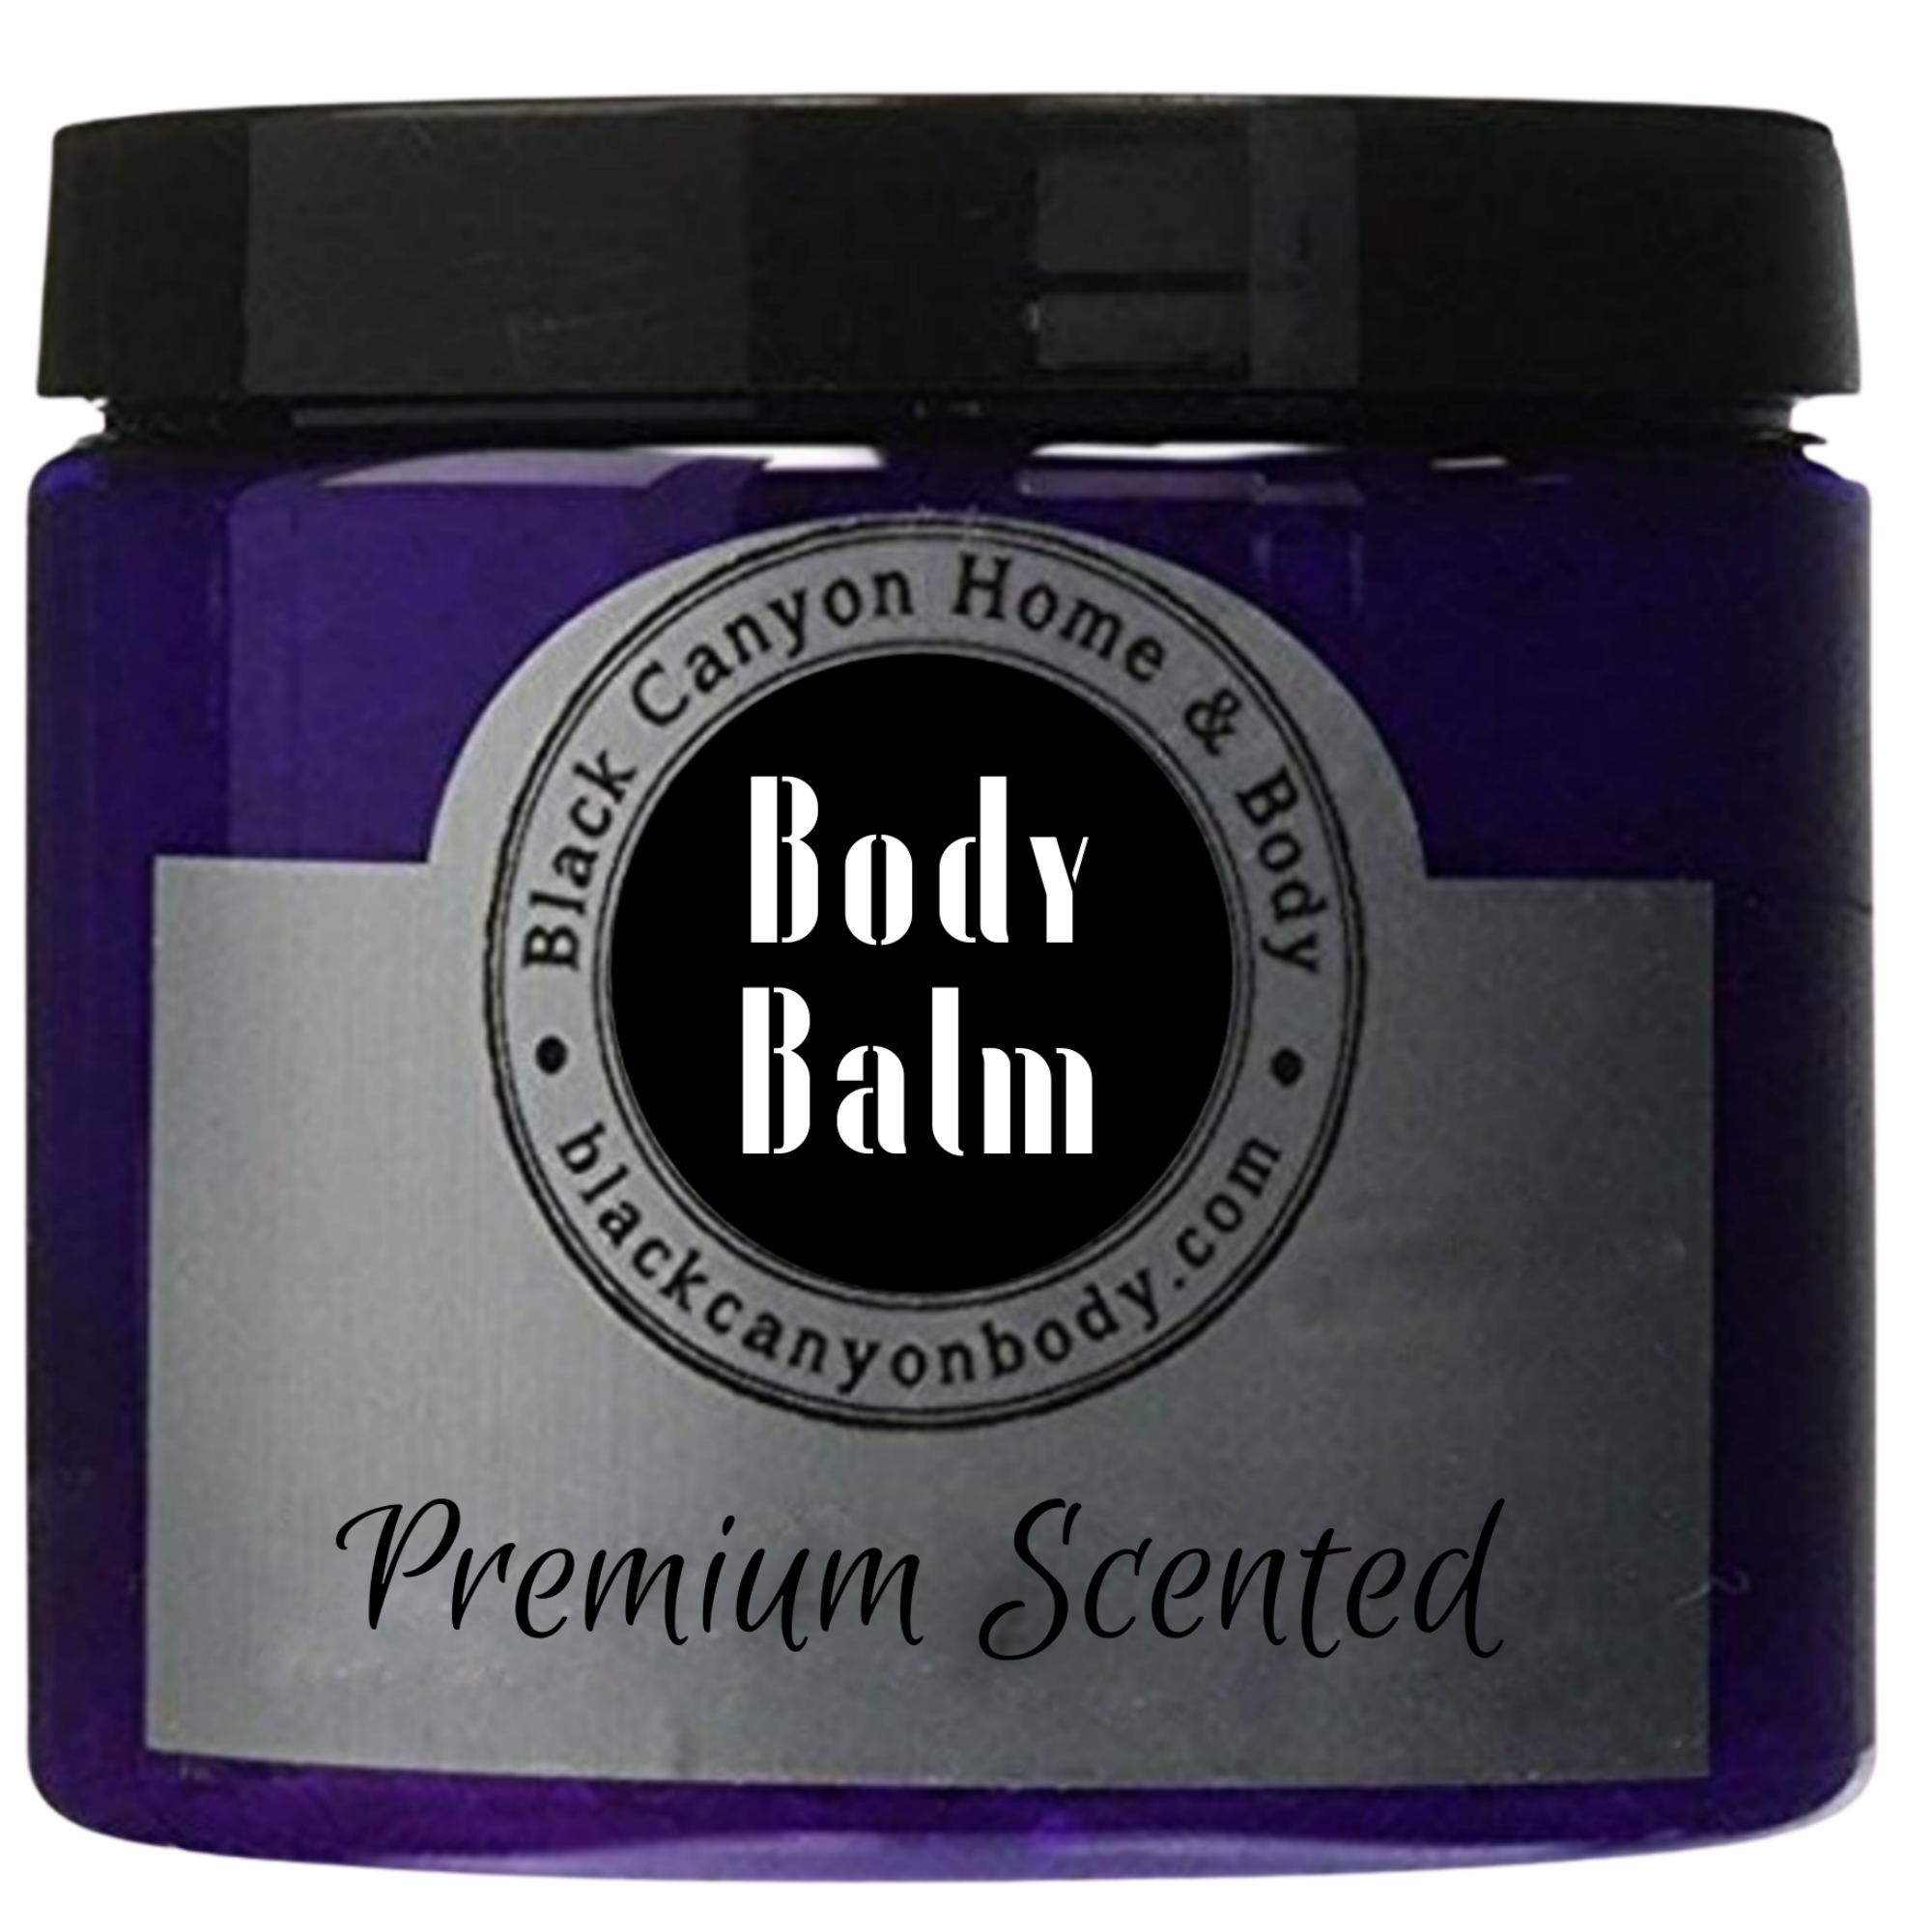 Black Canyon Chocolate Decadence Scented Natural Body Balm with Shea